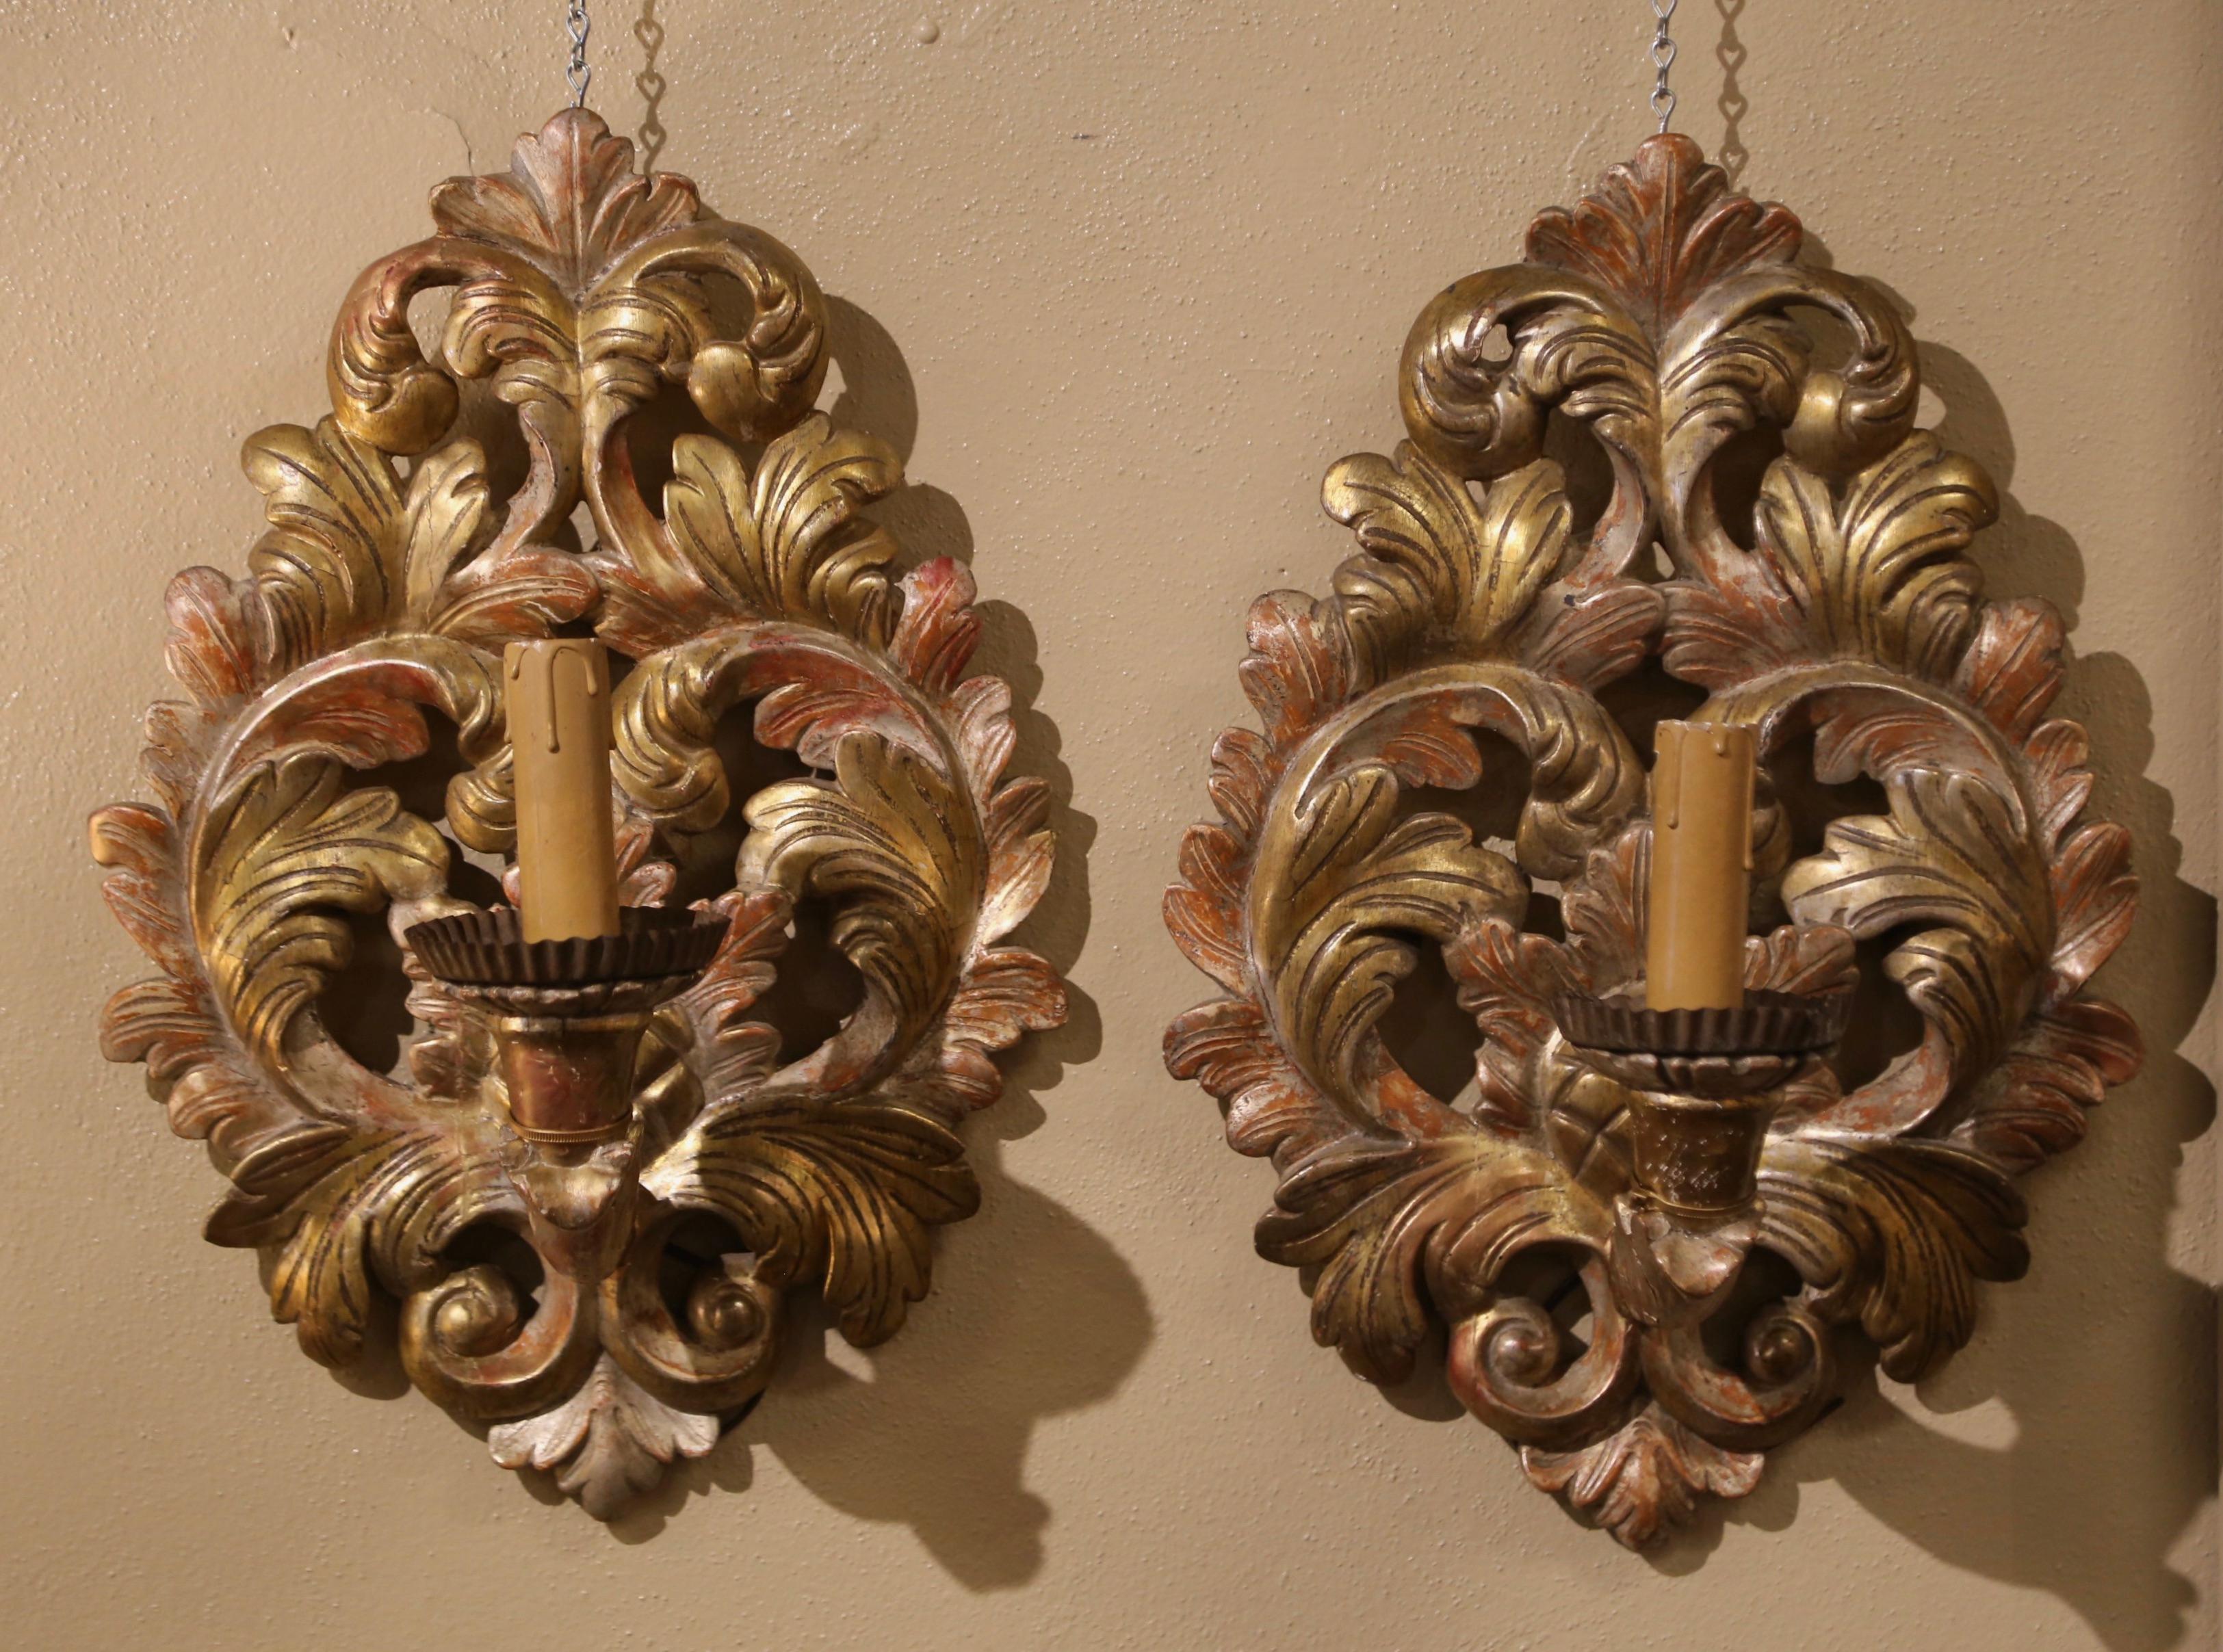 Hand-Carved Pair of 19th Century French Carved Giltwood Wall Sconces with Leaf Motifs For Sale